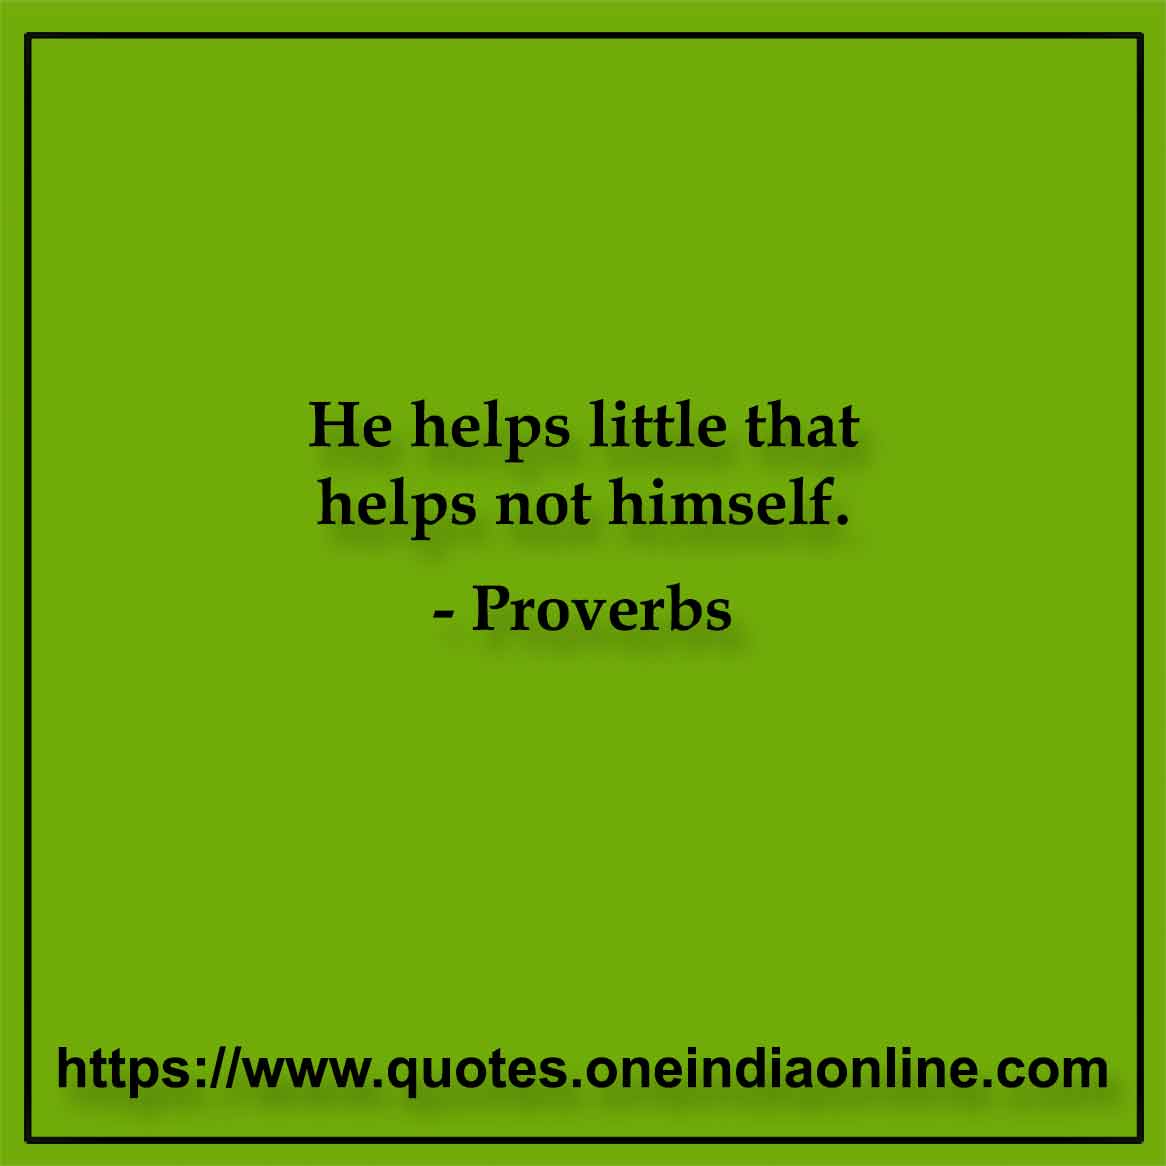 He helps little that helps not himself.

